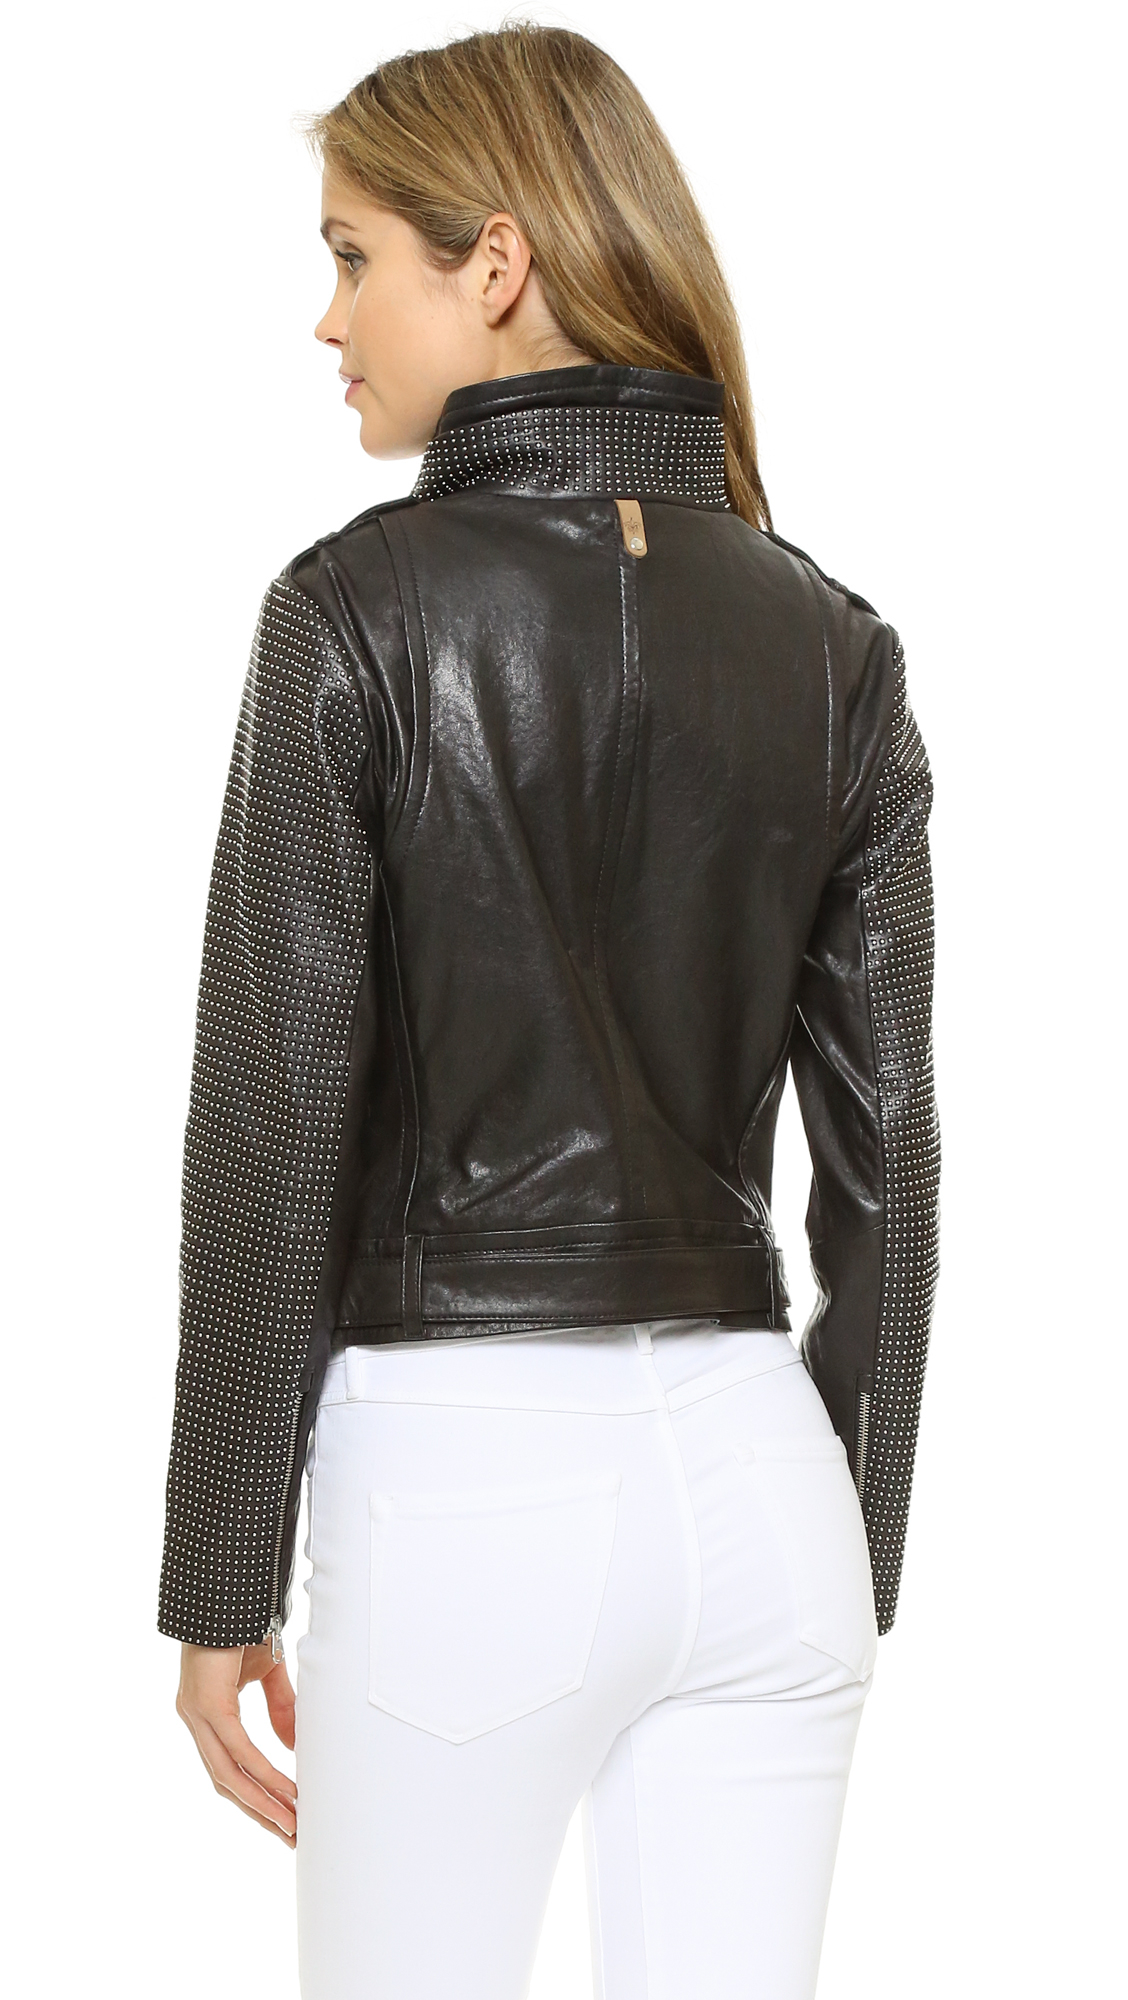 Lyst - Mackage Washed Leather Jacket in Black